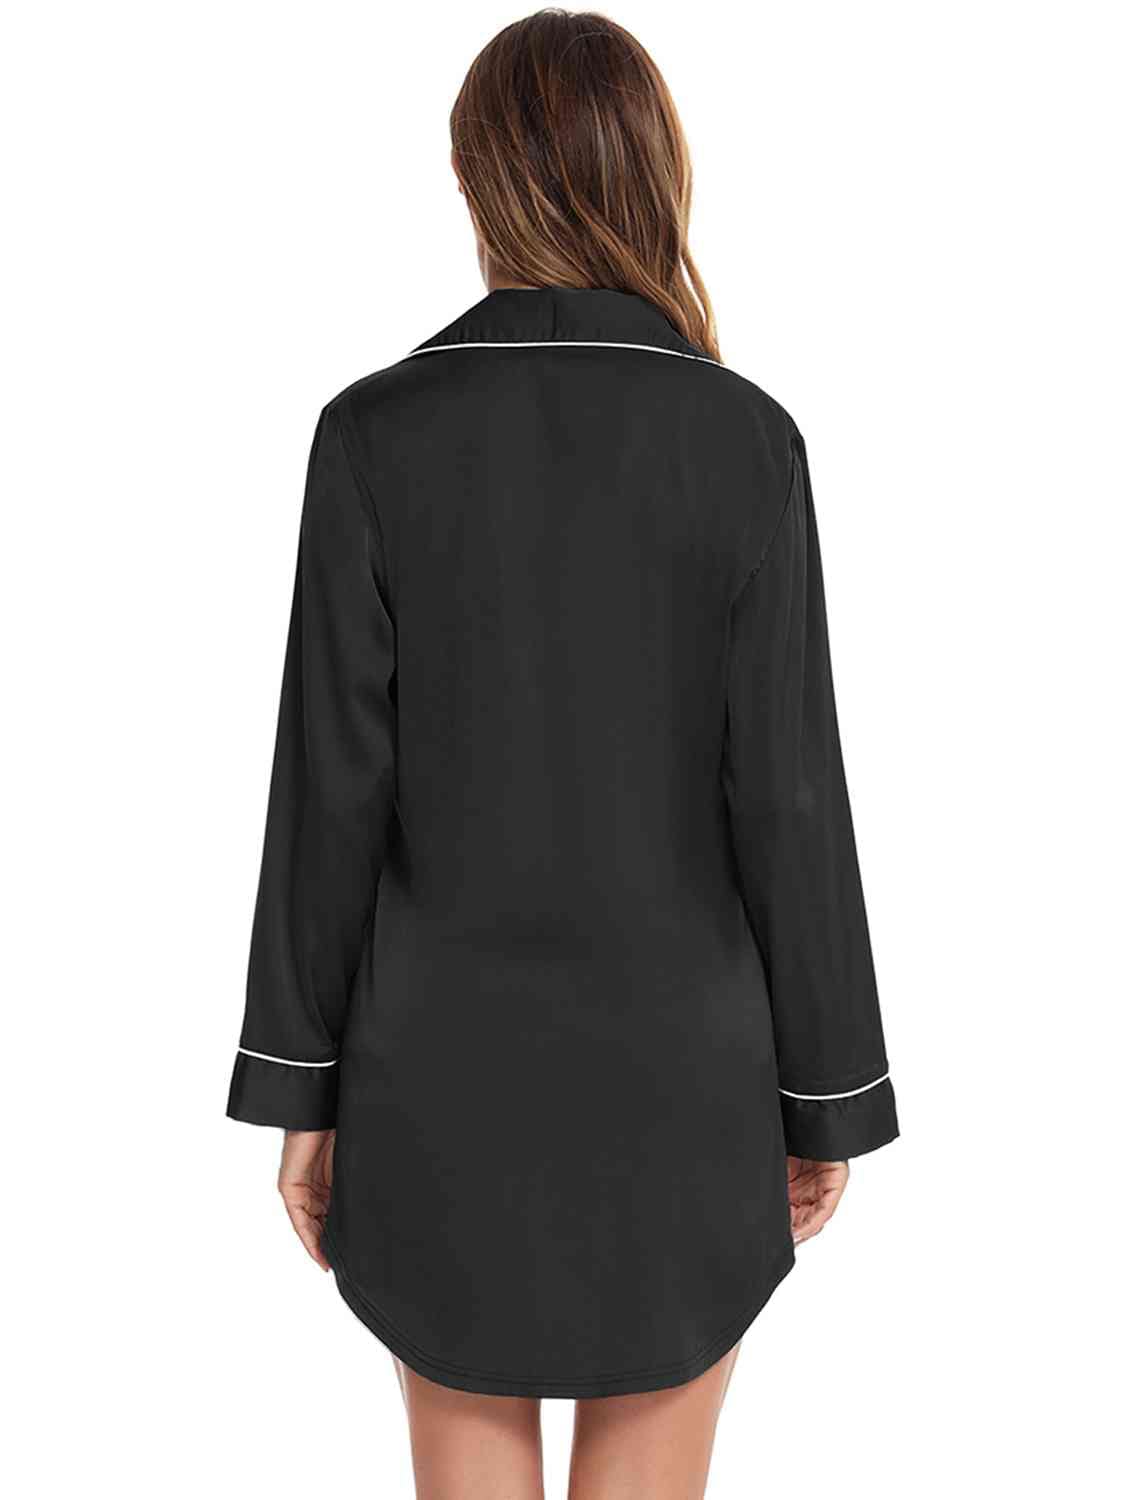 Trendsi Black / S Button Up Lapel Collar Night Dress with Pocket 101100834675047 Apparel & Accessories > Clothing > Sleepwear & Loungewear > Robes